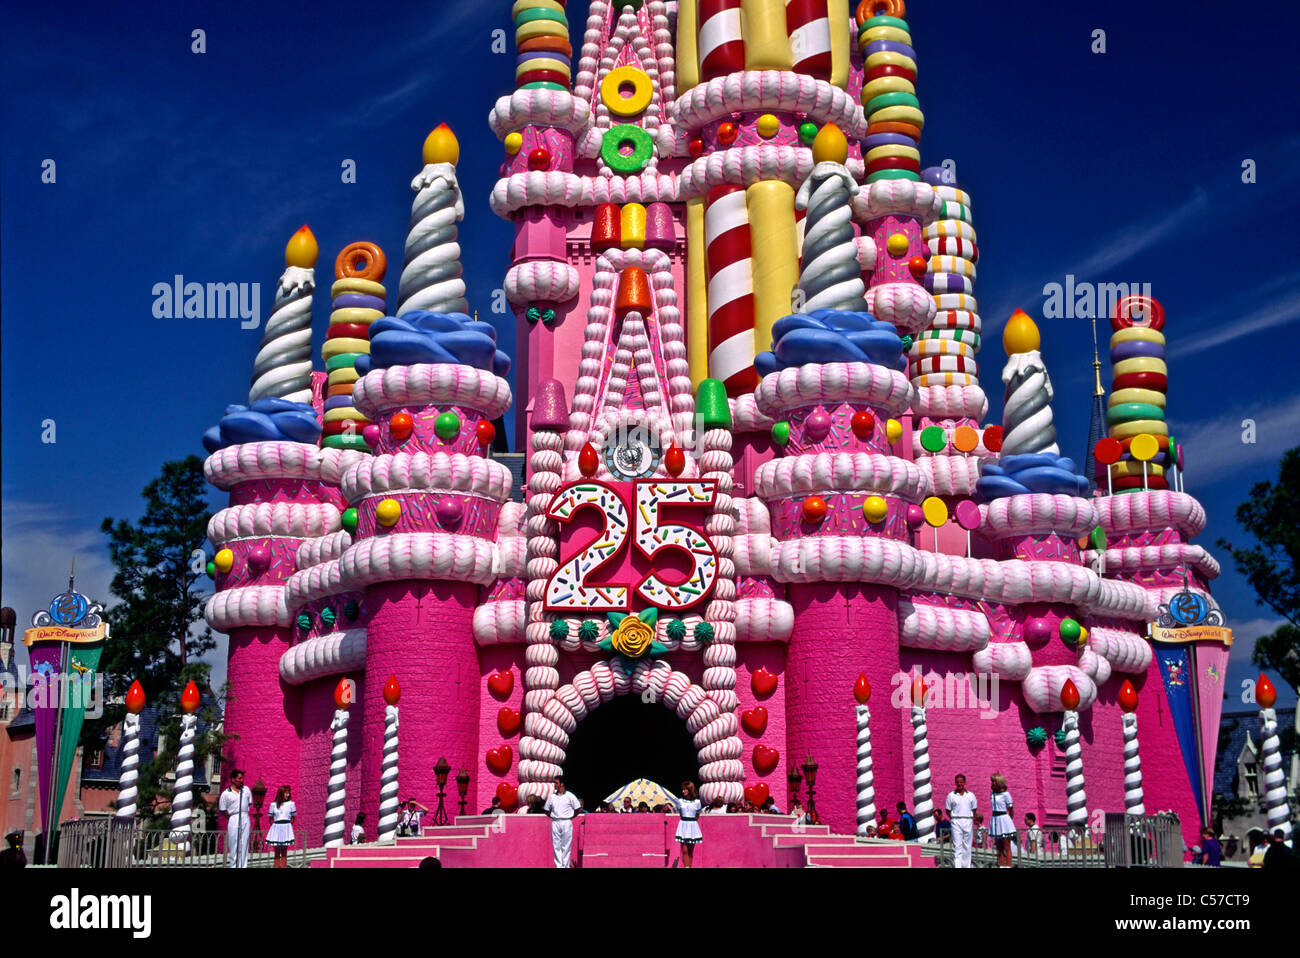 disney-world-florida-and-cinderellas-castle-decorated-for-the-25th-C57CT9.jpg